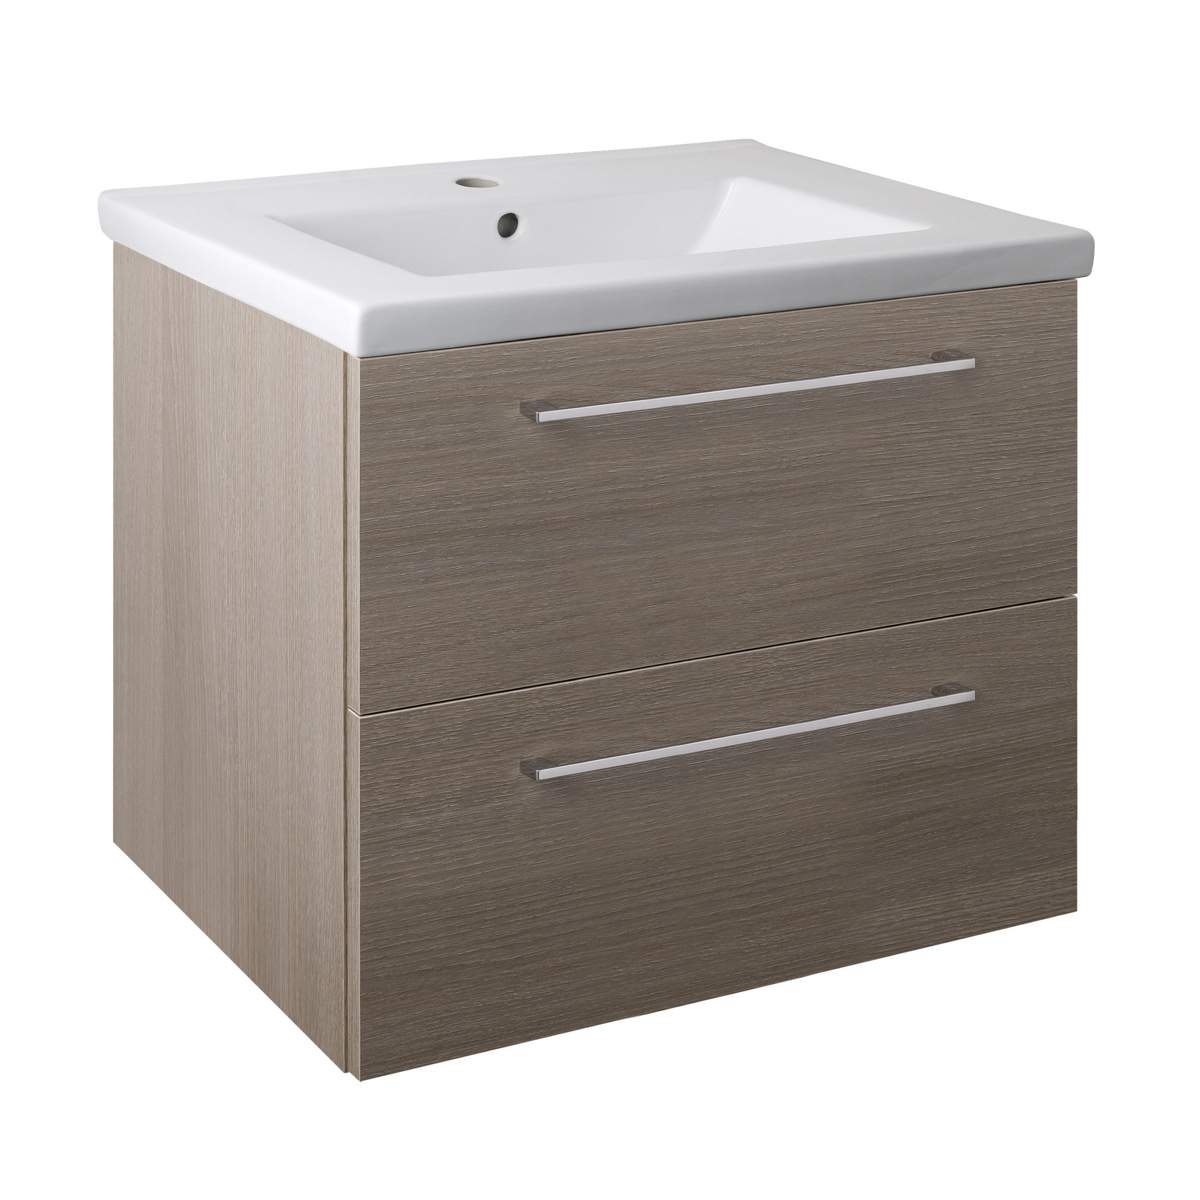 JTP Pace Units 600mm Wall Mounted Unit with Drawers and Basin in Grey